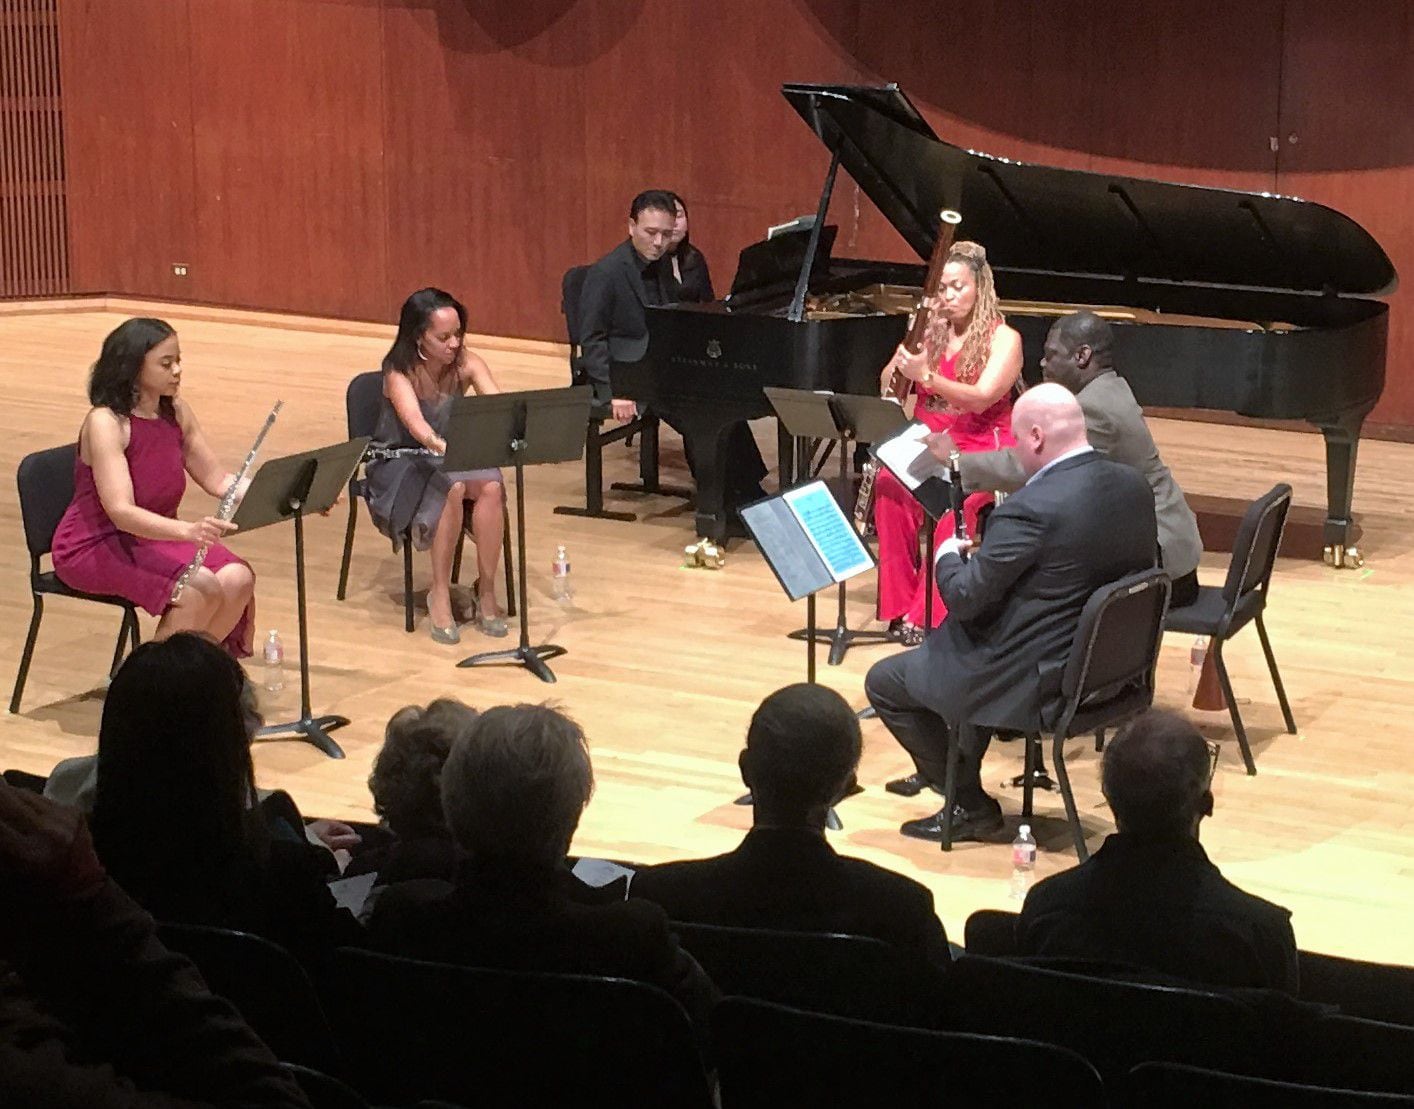 Pianist Jon Nakamatsu and the Imani Winds--L to R, Julietta Curenton (flute), Toyin-Spellman-Diaz (oboe), Monica Ellis (bassoon), Mark Dover (clarinet) and Jeff Scott (horn)--prepare to play the Poulenc Sextet for piano winds on Jan. 29, 2018 at Caruth Auditorium, Southern Methodist University 